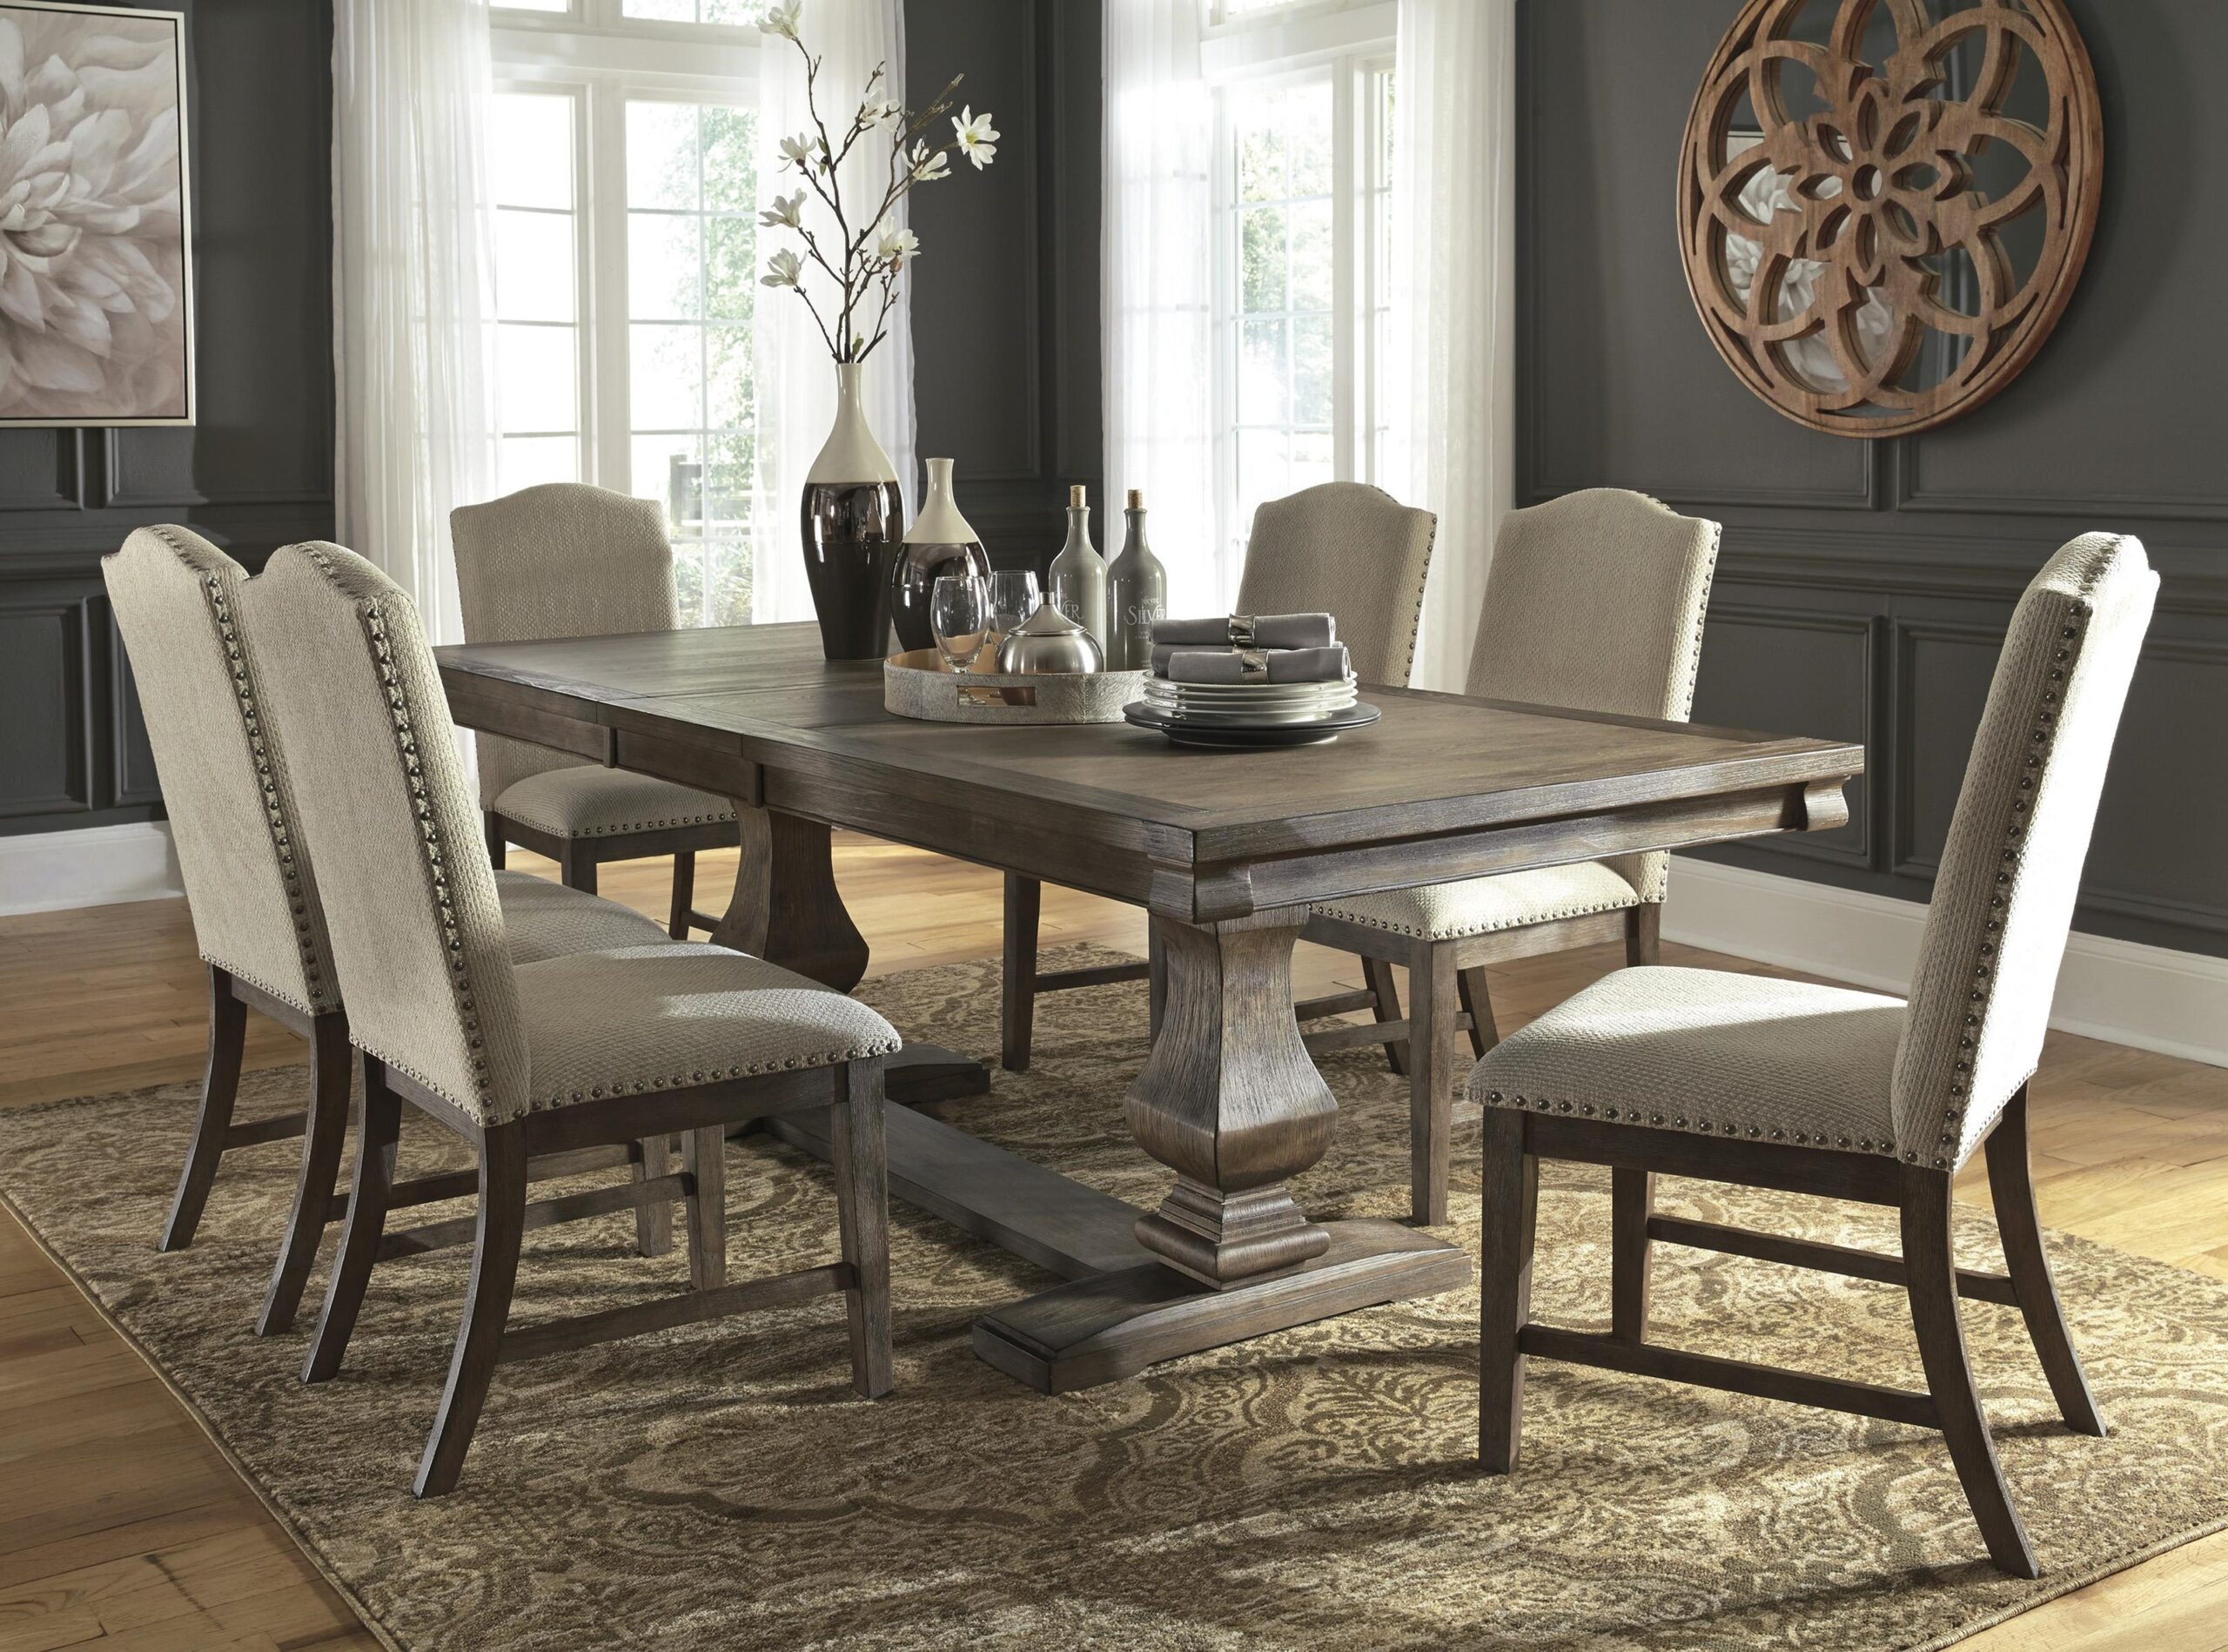 10 Stylish Dining Room Decoration Ideas for New Homeowners in 2022